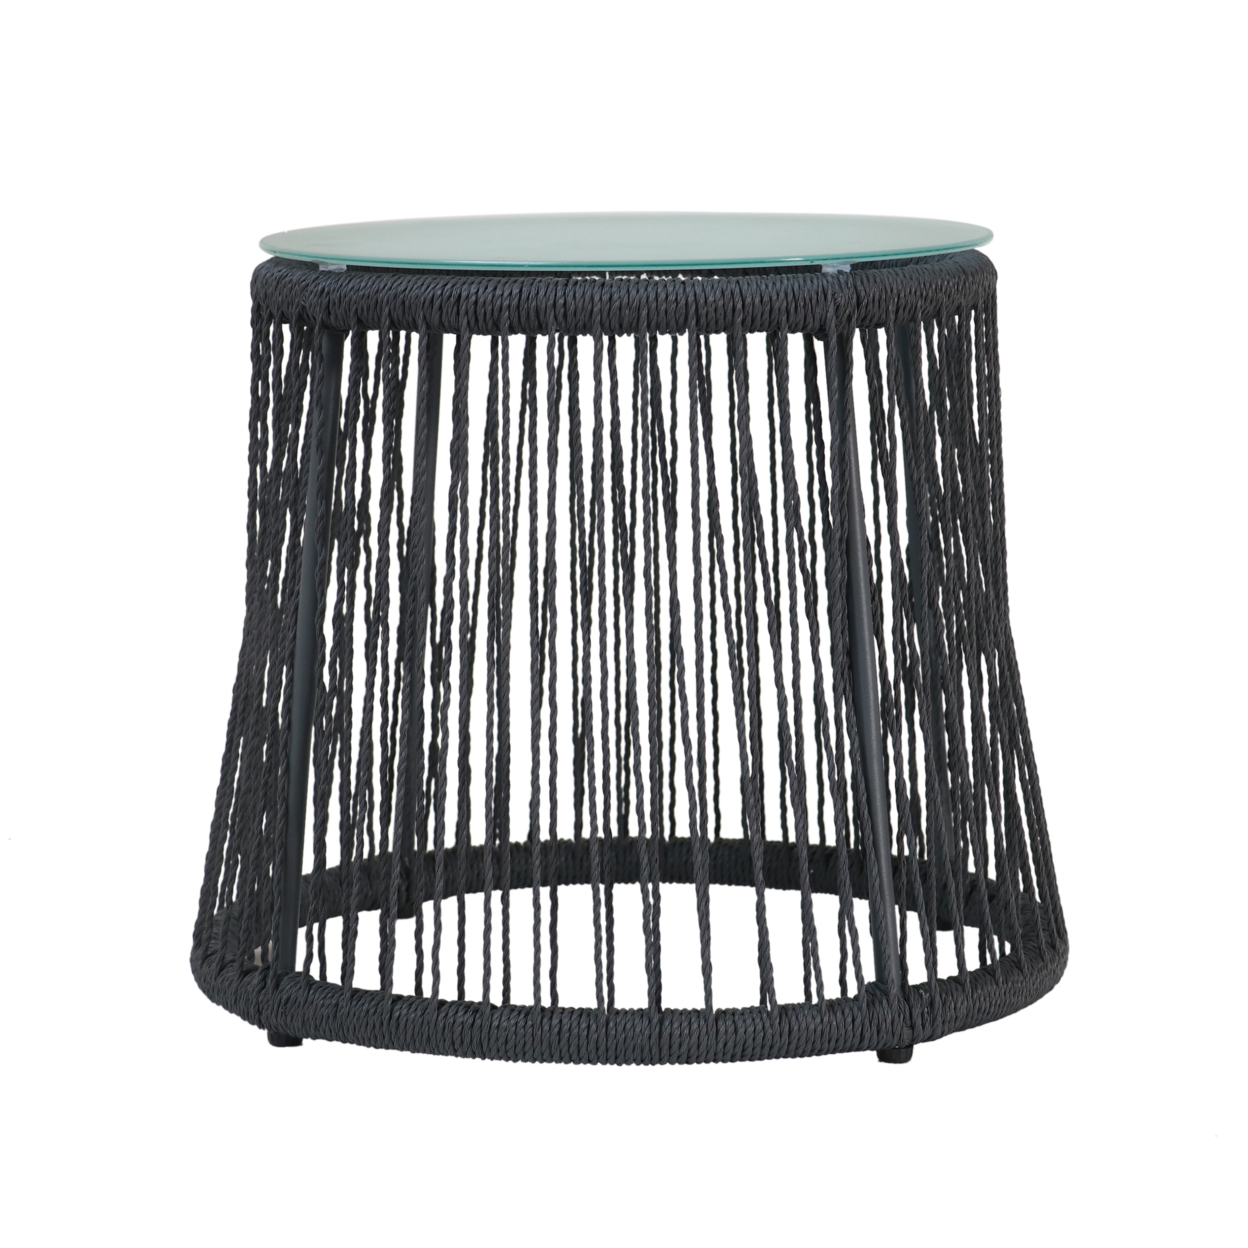 Karen Outdoor Side Table, Steel And Rope, Tempered Glass Table Top, Boho - Gray